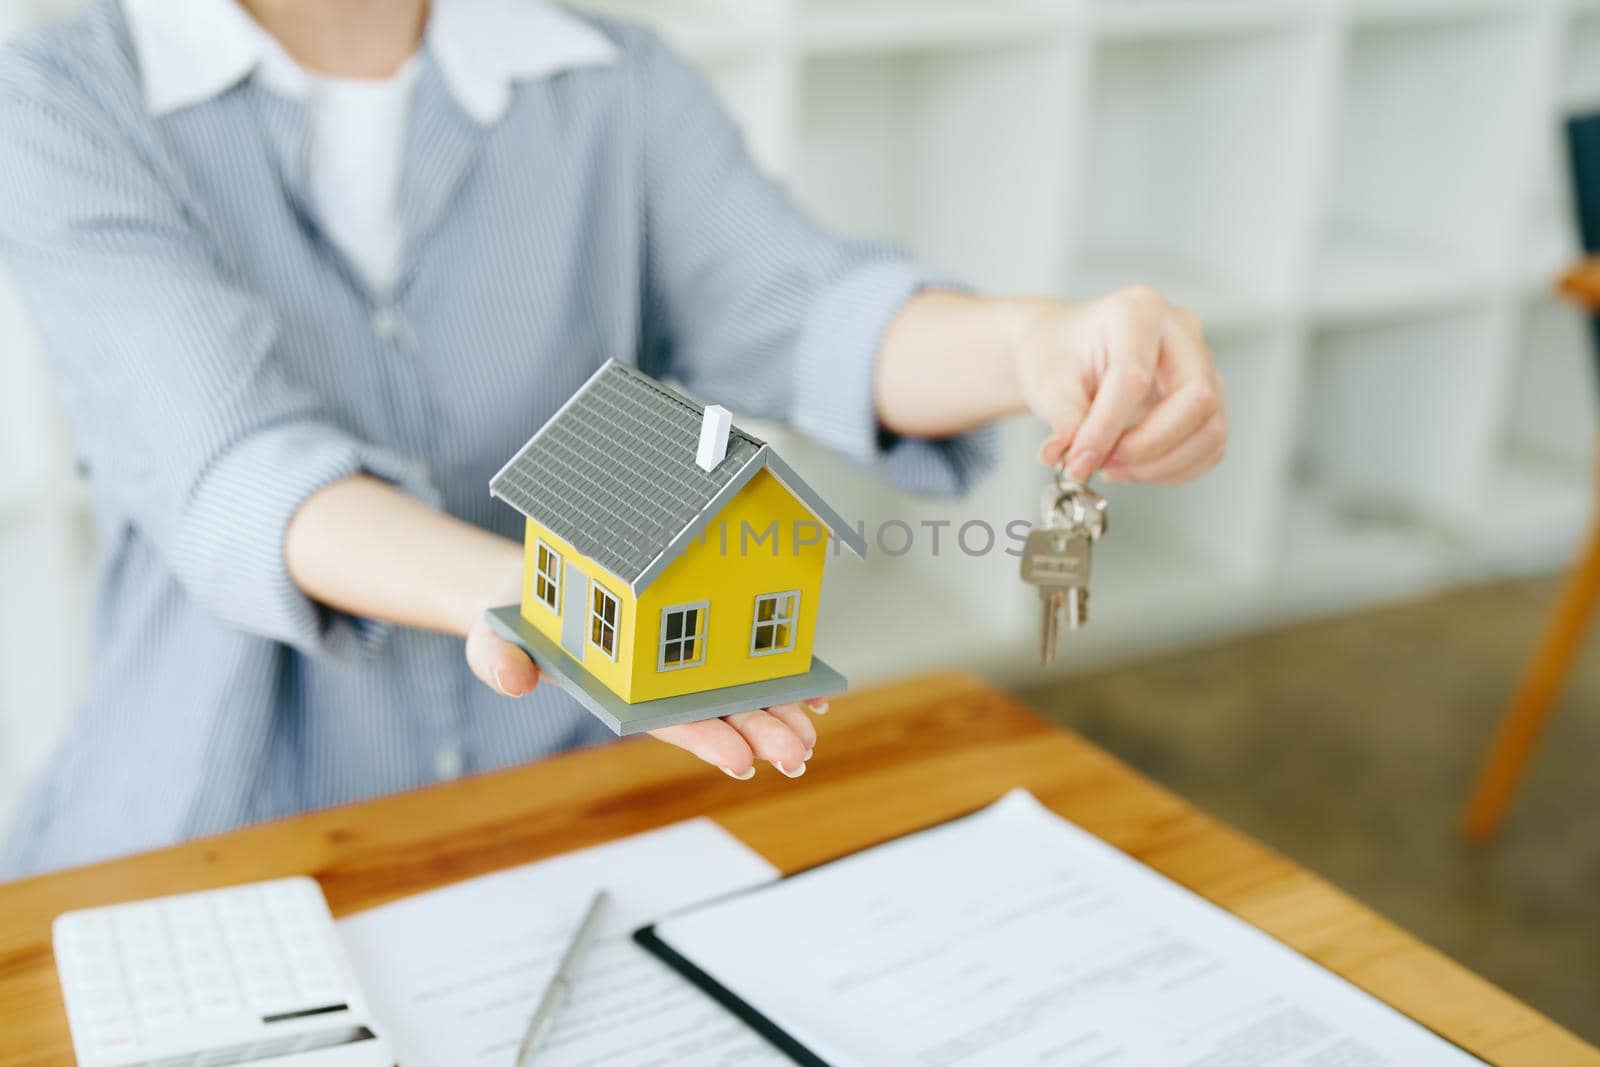 Accountant, businesswoman, real estate agent, Asian business woman handing model house and keys to customers along with house interest calculation documents for customers to sign.